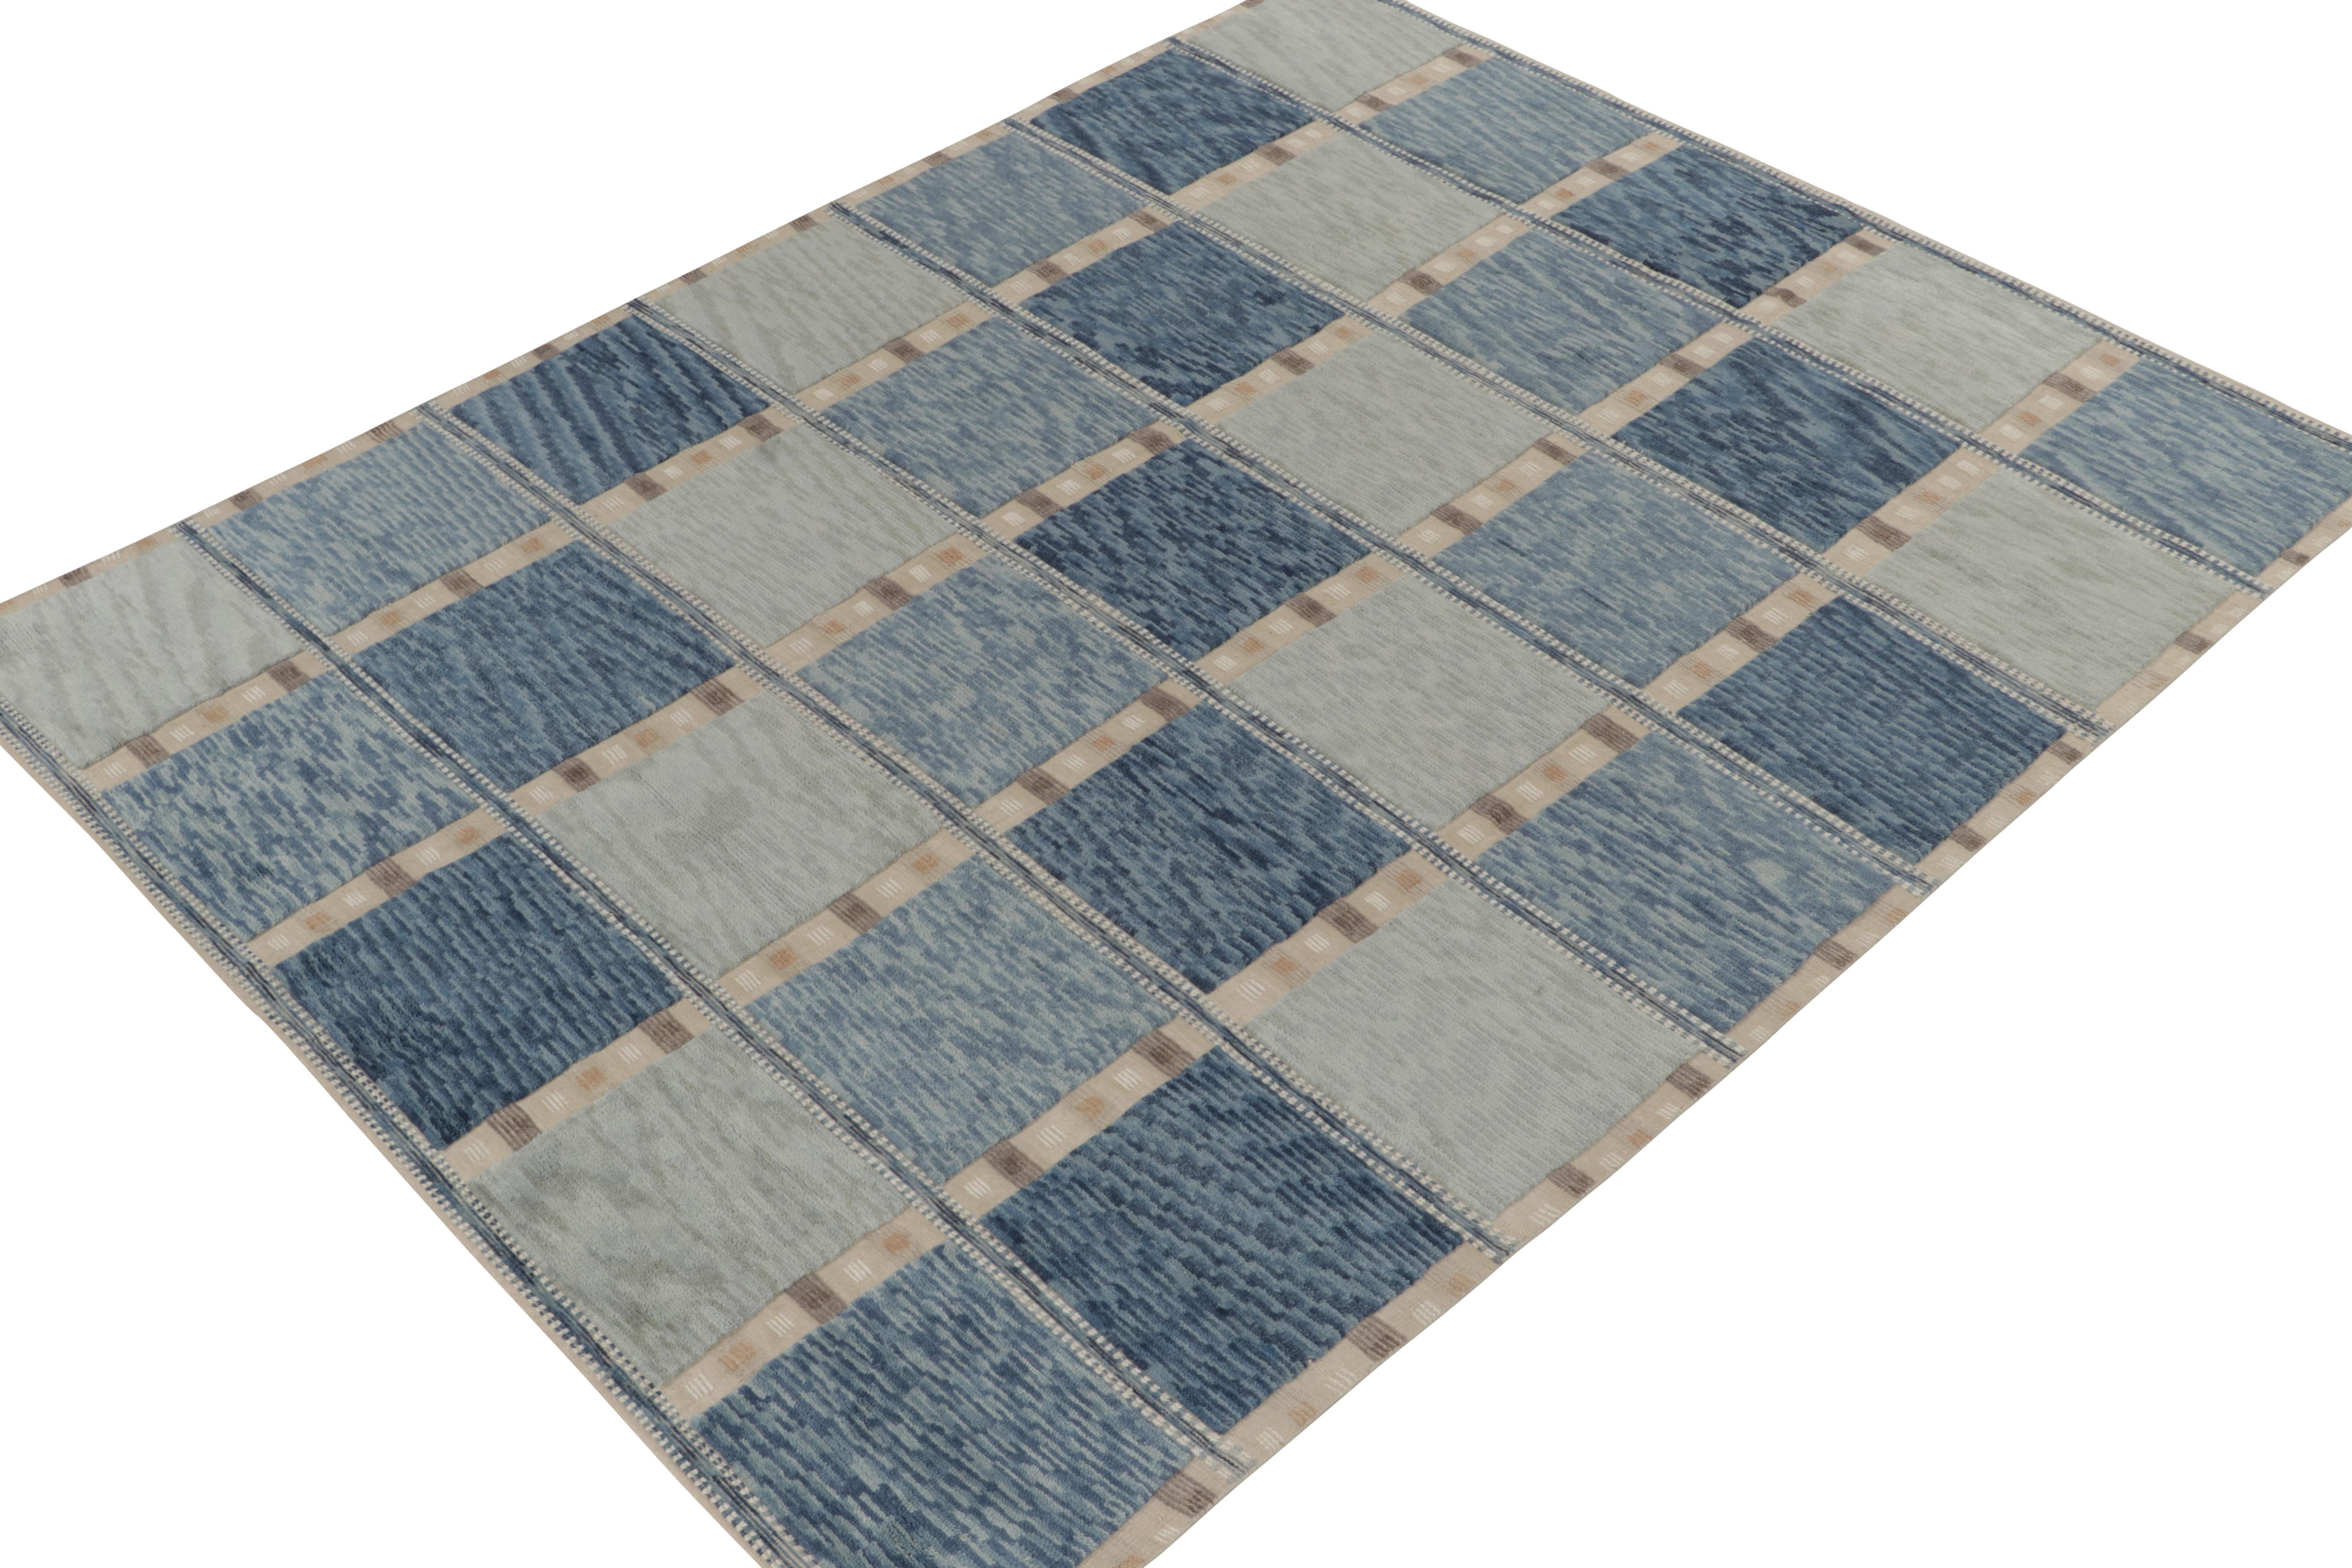 Rug & Kilim’s innovative take on Scandinavian style, from our celebrated finer weave line of the titular award-winning collection. This 8x10 rug recaptures the finesse of Swedish Deco aesthetics with a smart geometric pattern in variegated tones of